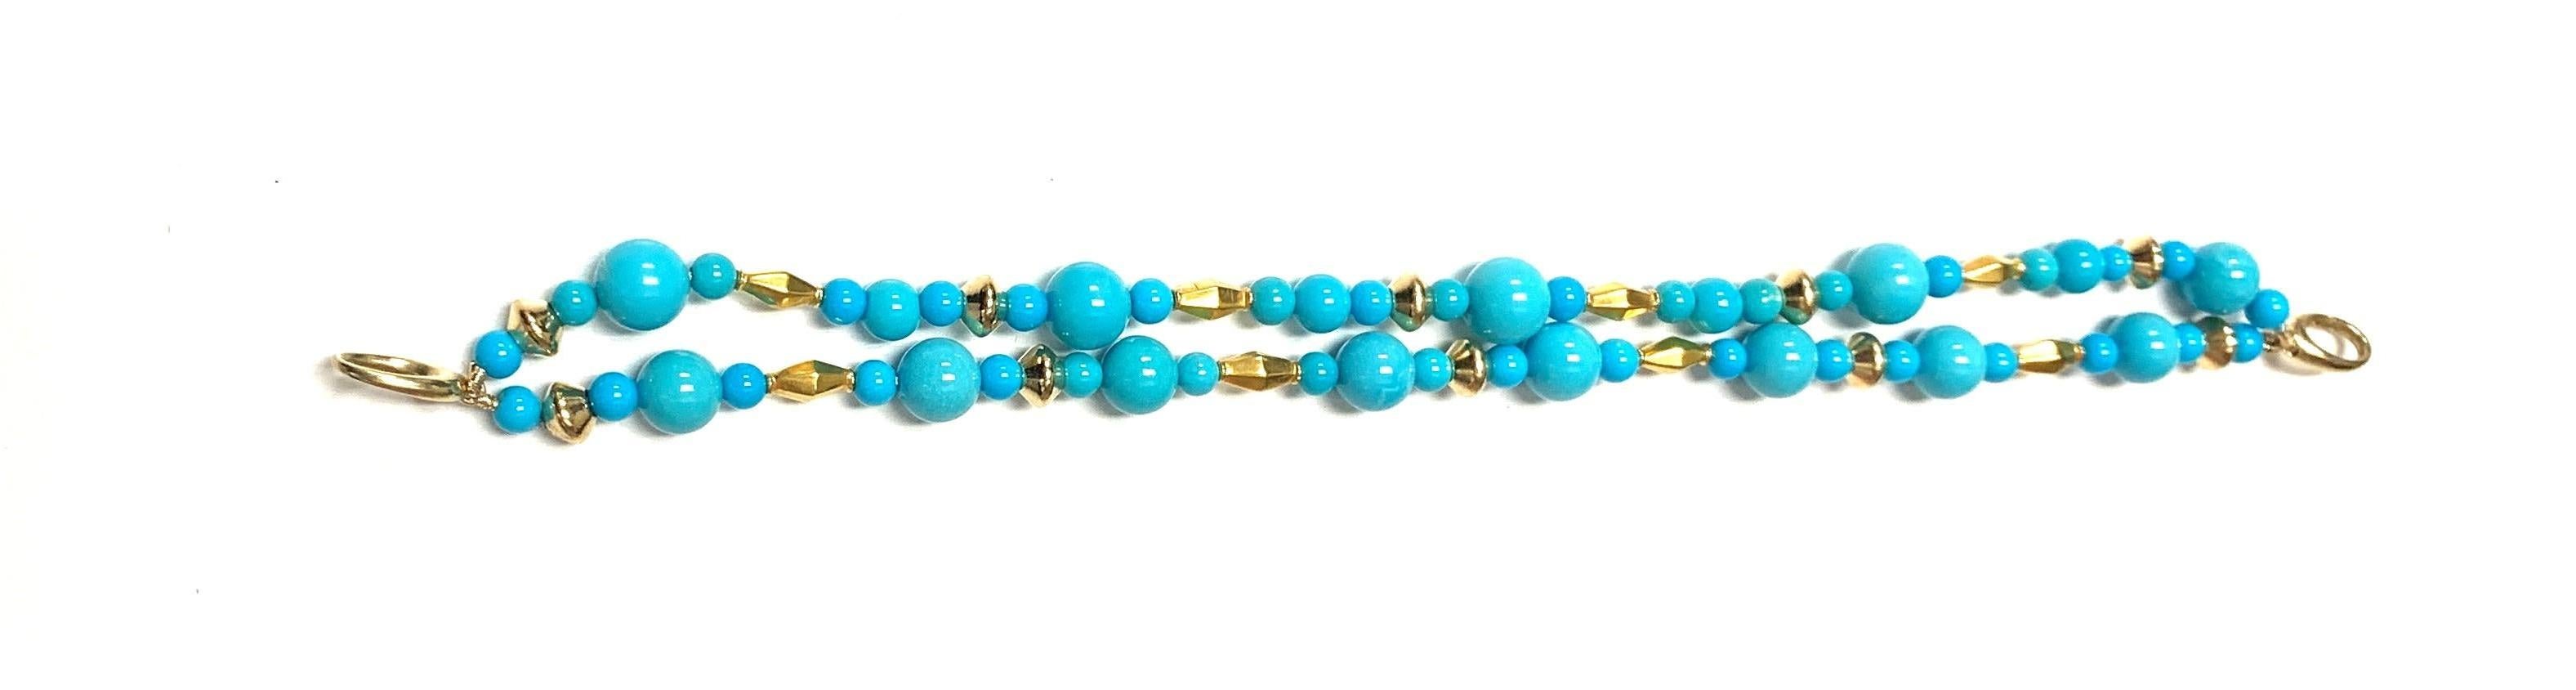 This gorgeous double strand bracelet features highly prized natural turquoise beads from the Sleeping Beauty Mine in Arizona. Famous for its 